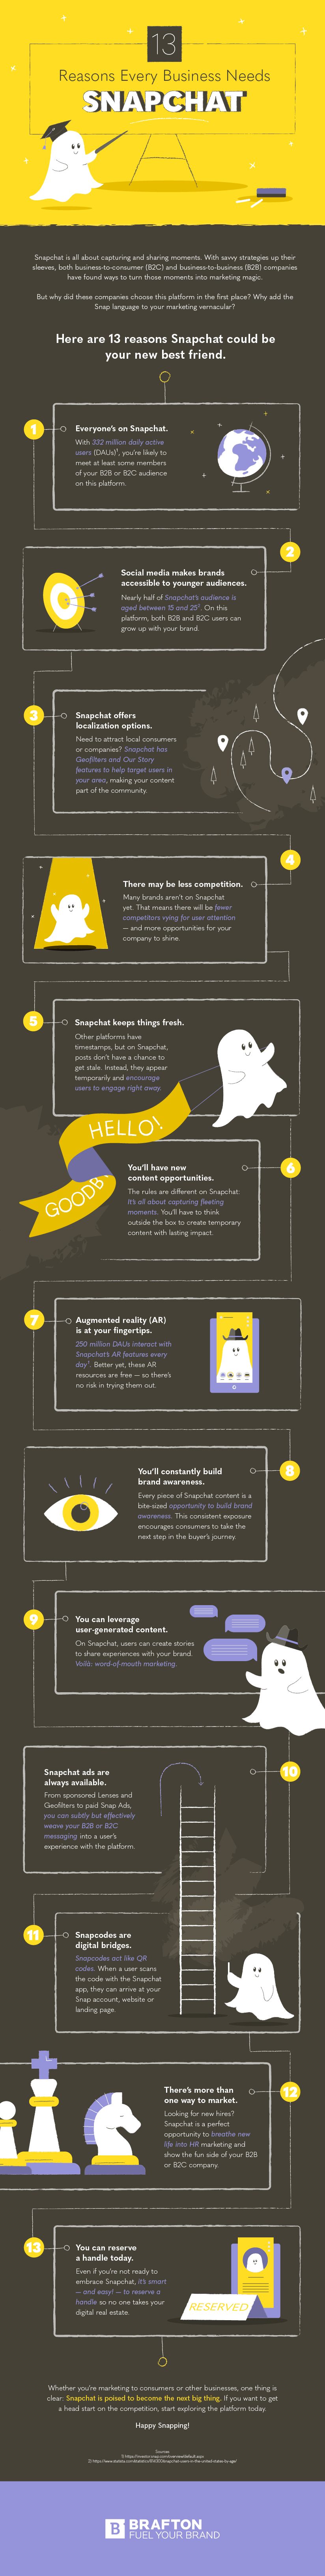 13 Reasons Every Business Needs Snapchat Infographic